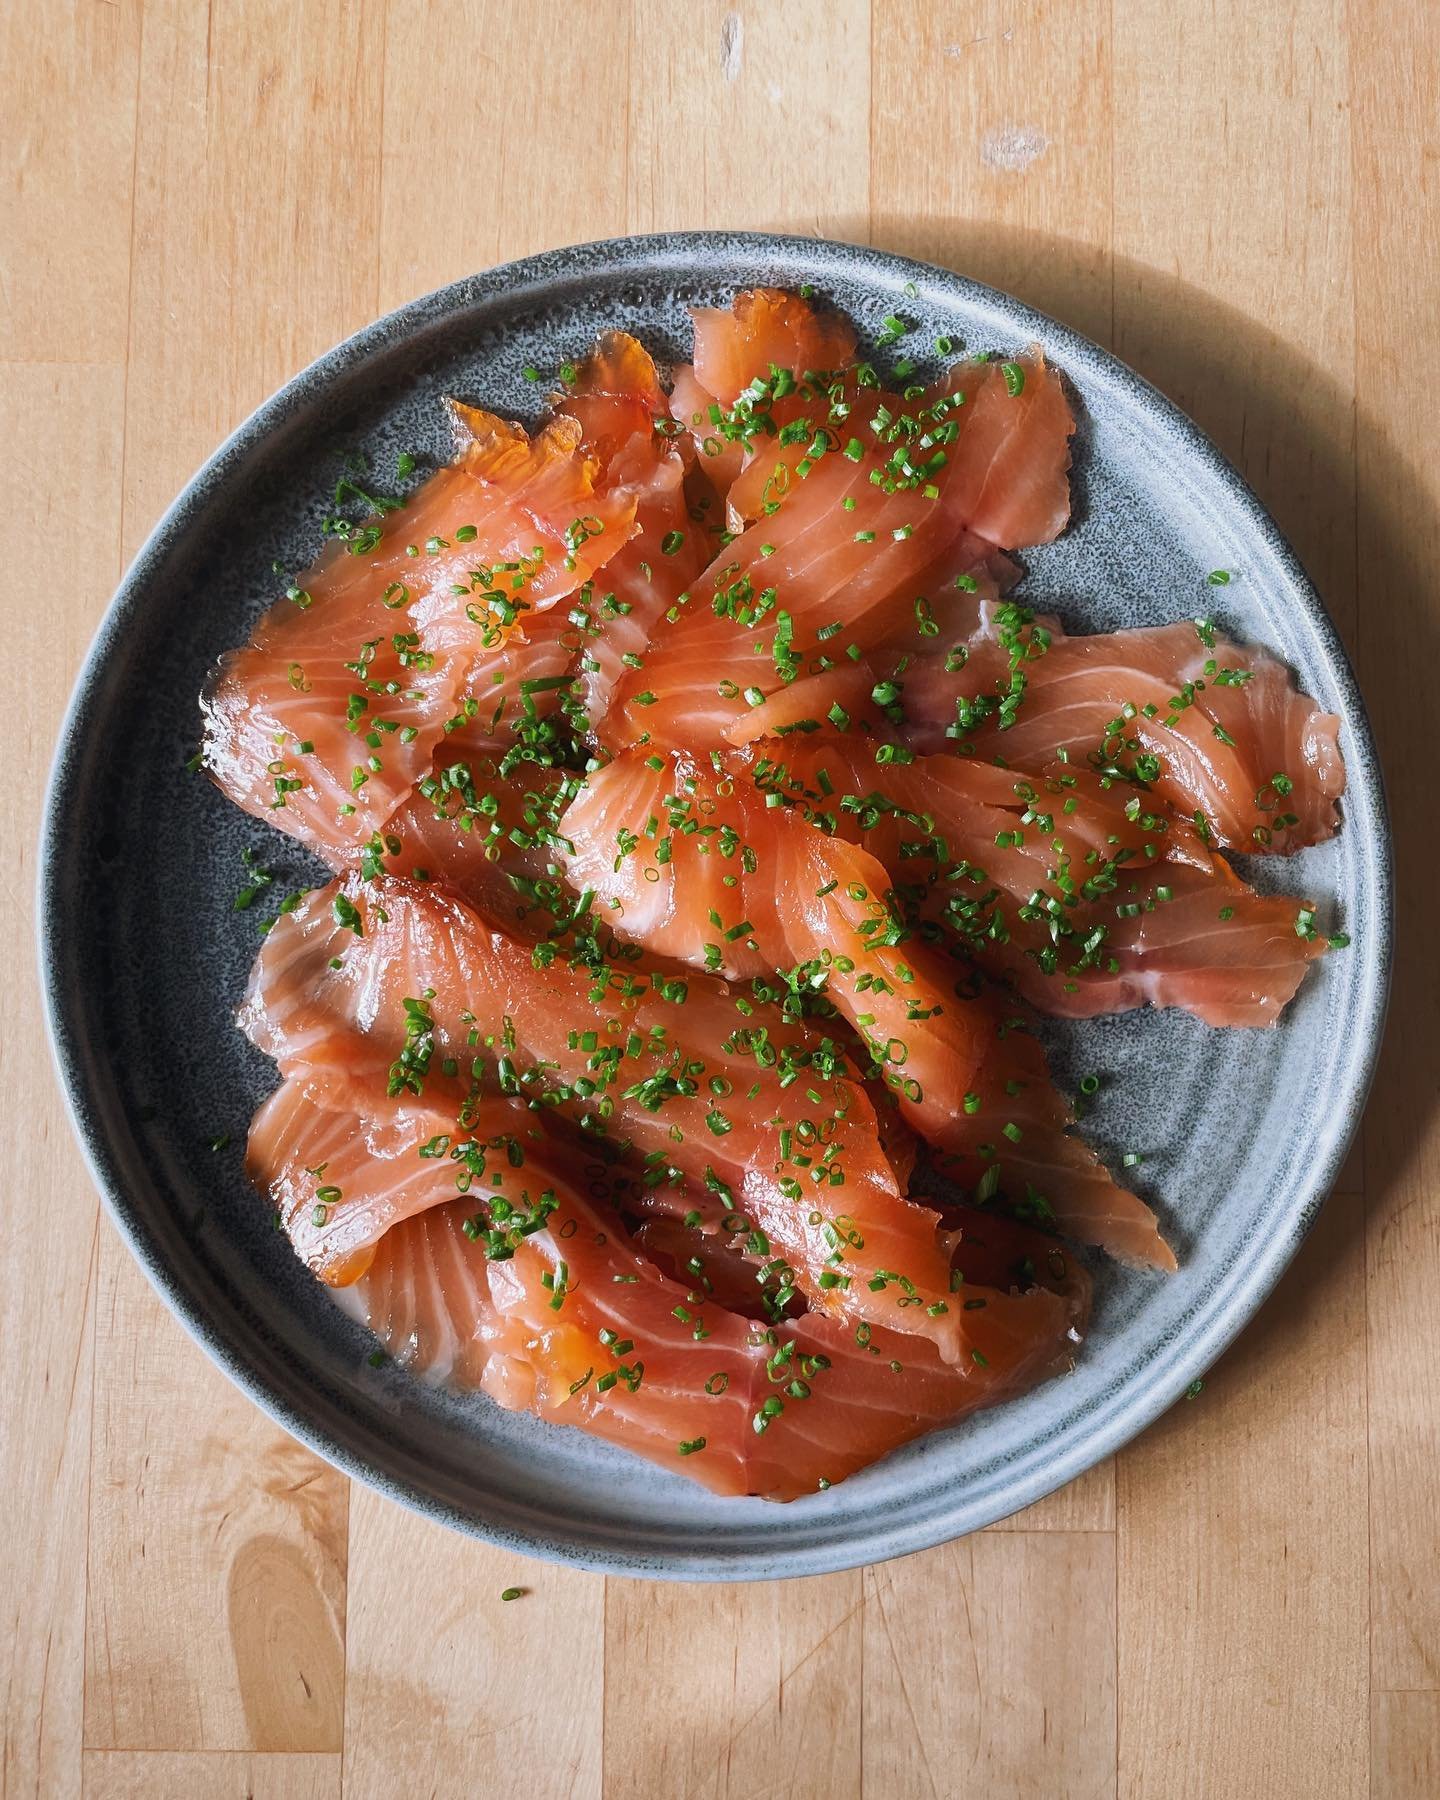 Cold smoked salmon with the first baby chives of the season! Smoked with apple wood - simple and mighty tasty.